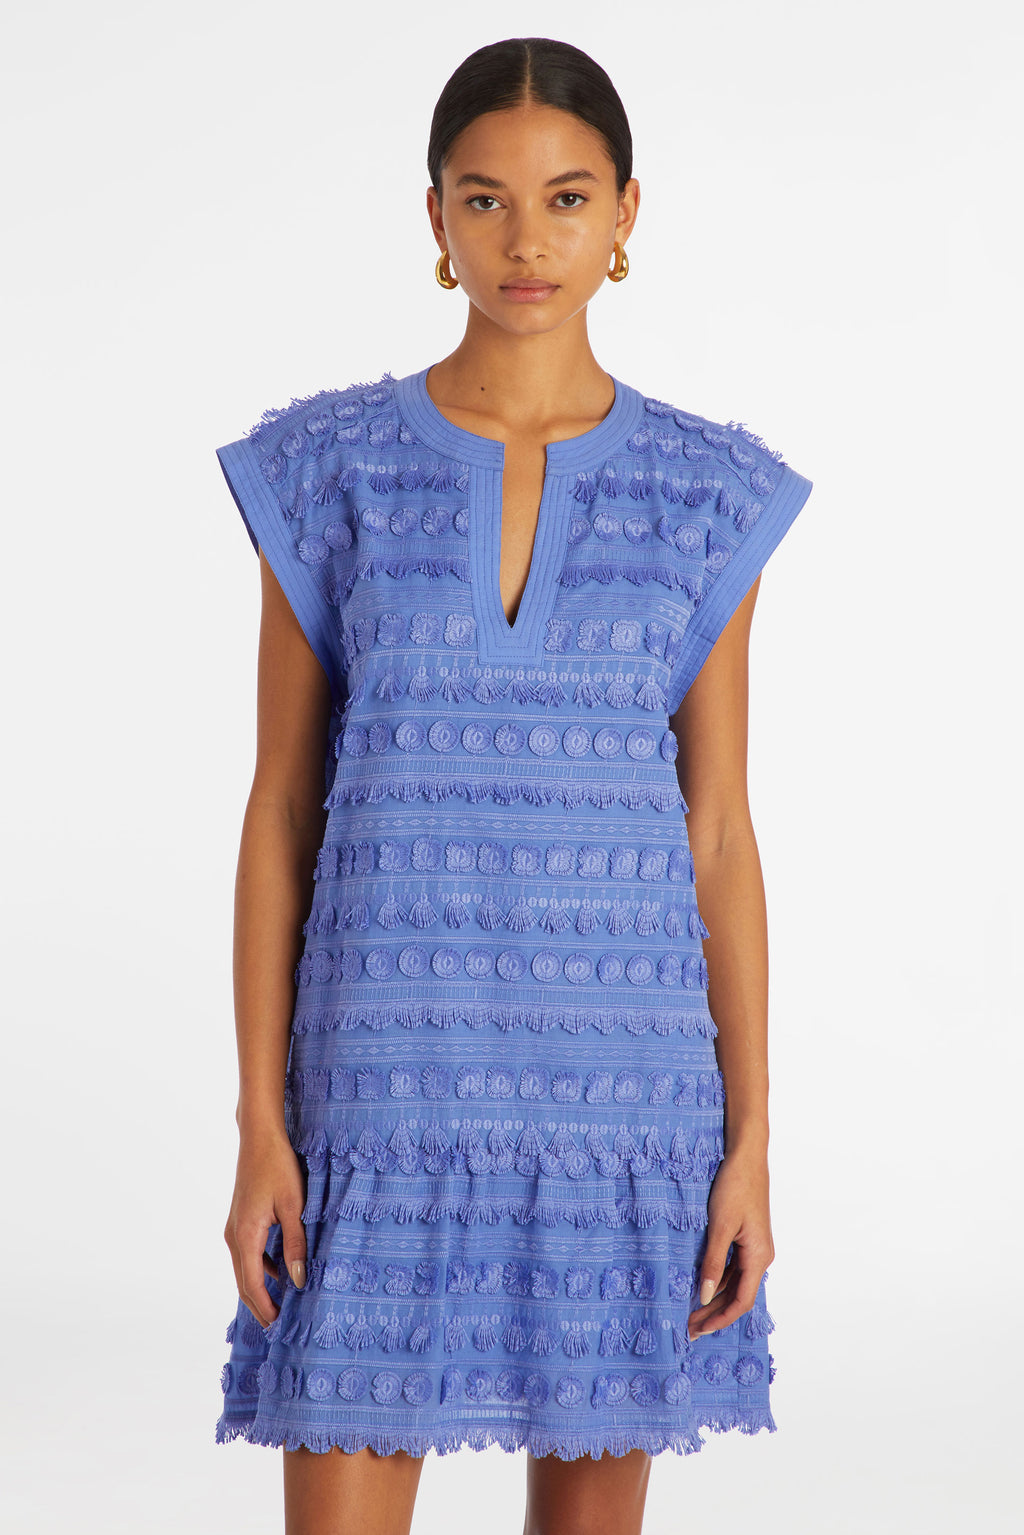 Solid blue short dress with short tassels to form the pattern 